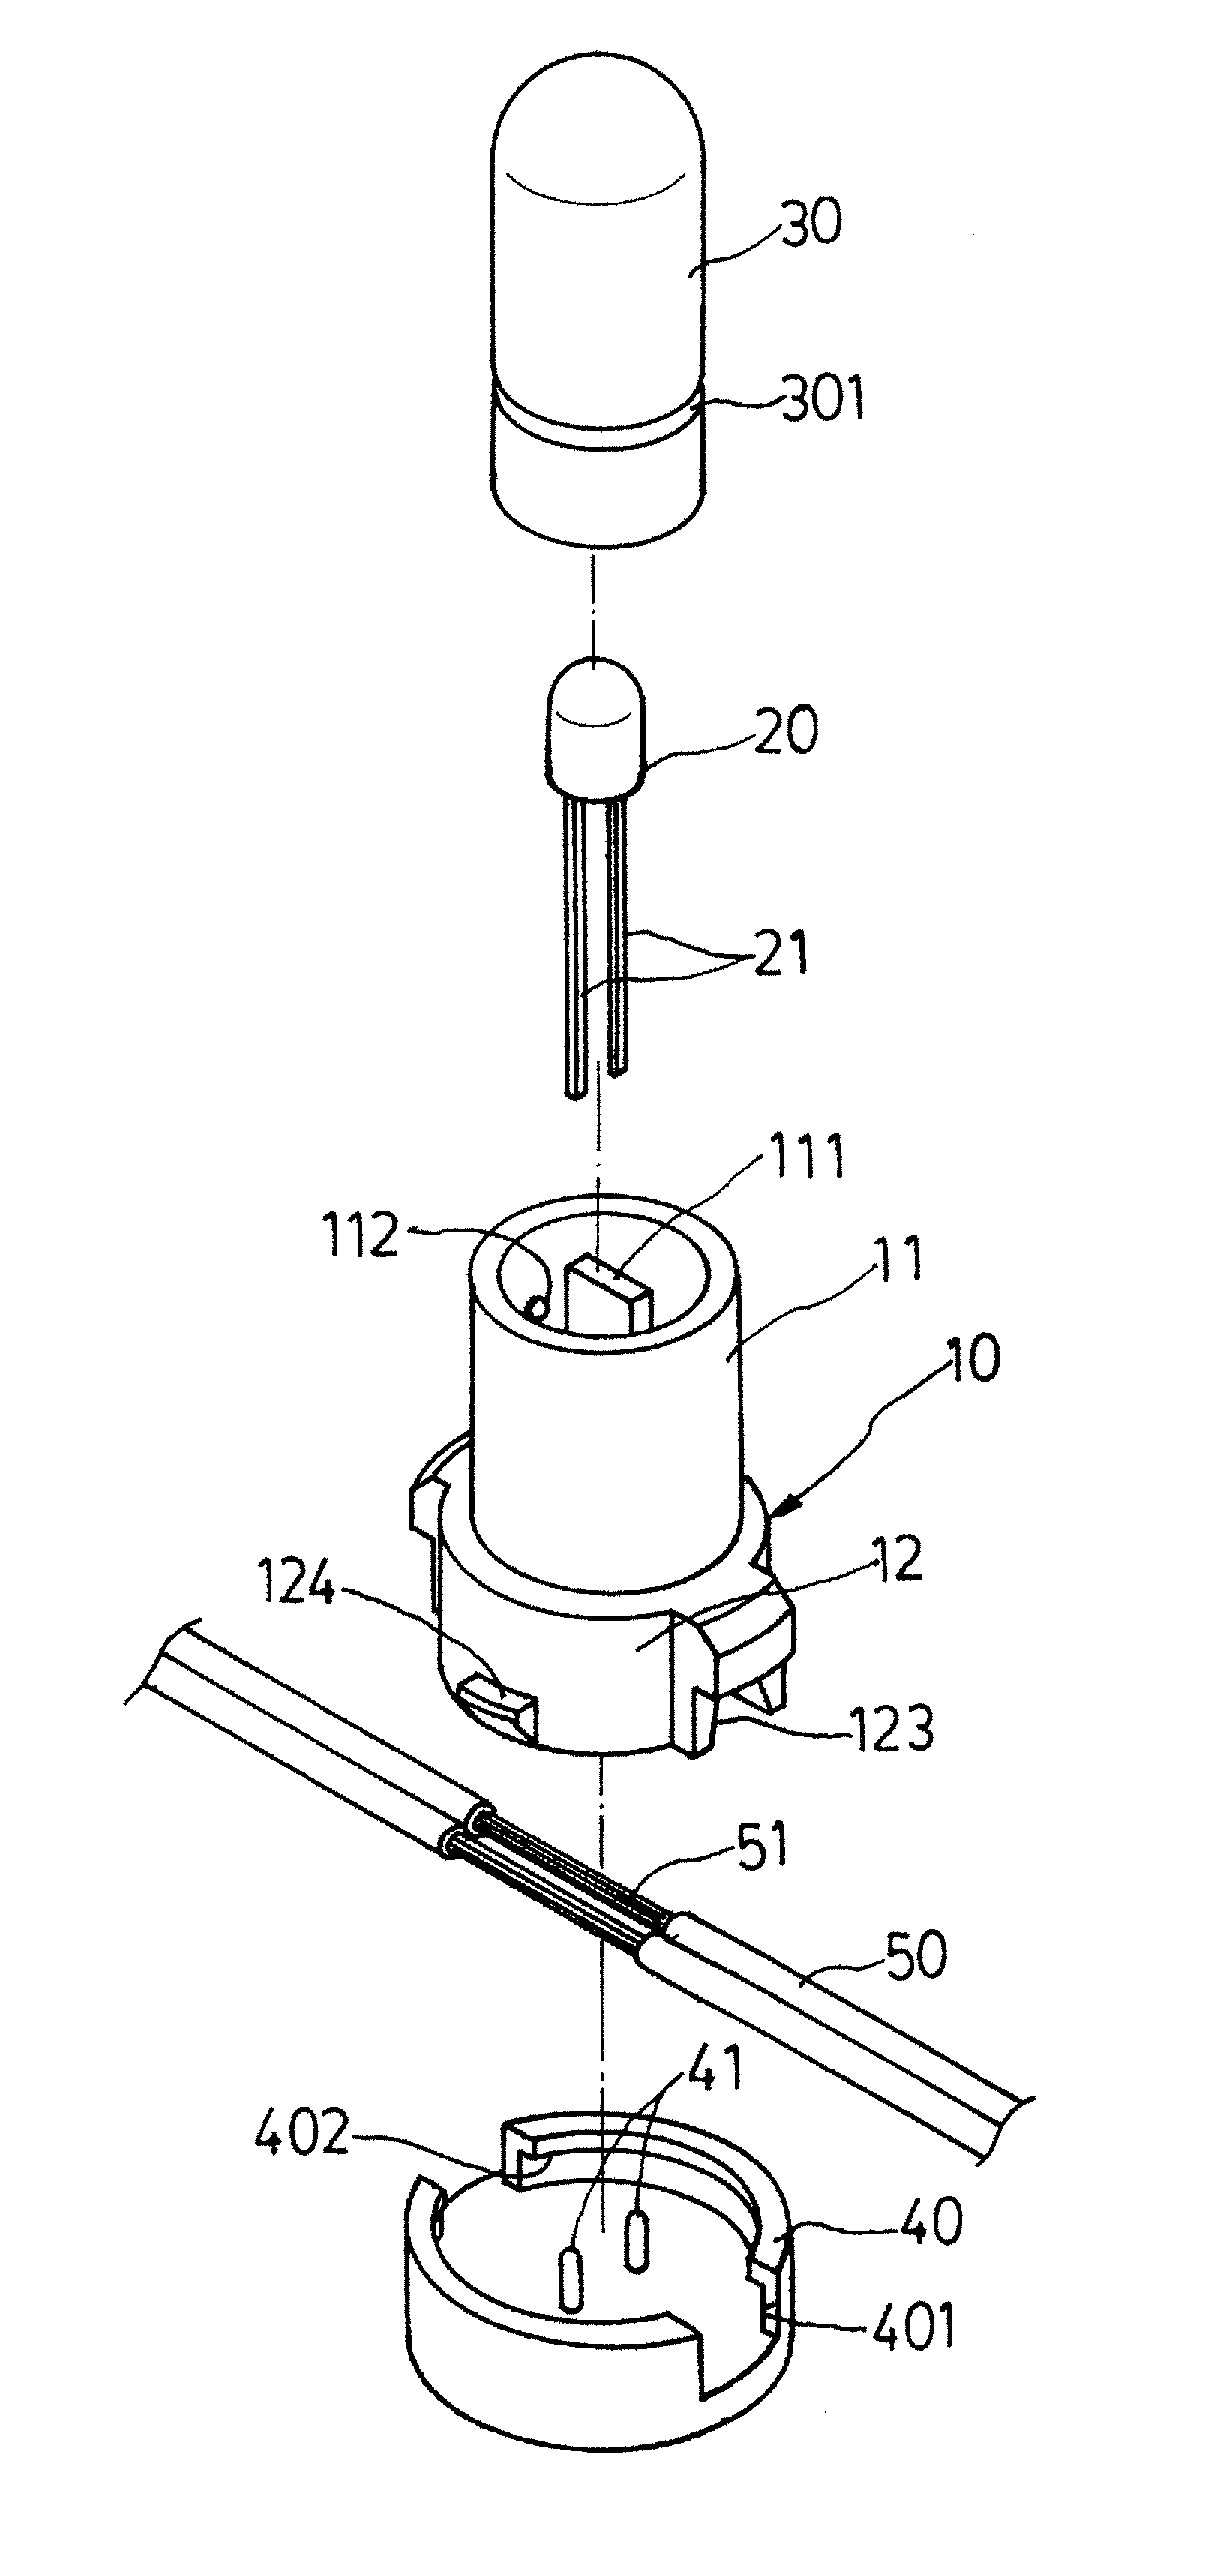 Bulb socket having terminals connected to a partially stripped cord